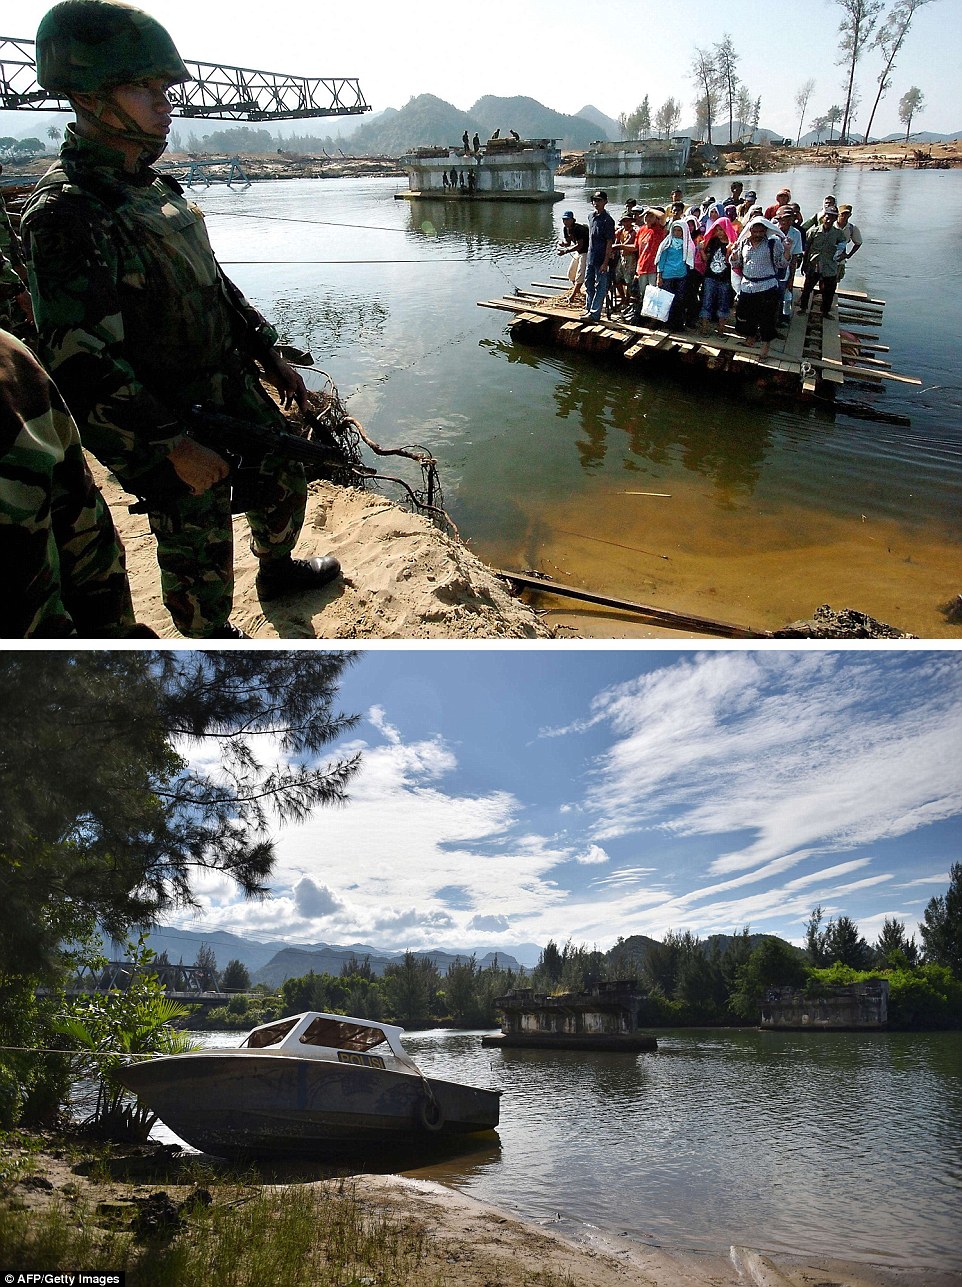 These two pictures show Lhoknga in Aceh province, the top one taken on January 23, 2005 showing residents using an improvised raft to cross a river as an Indonesian soldier guards the area, and the same location photographed on November 29, 2014 (bottom) showing the abandoned site and a new bridge constructed nearby